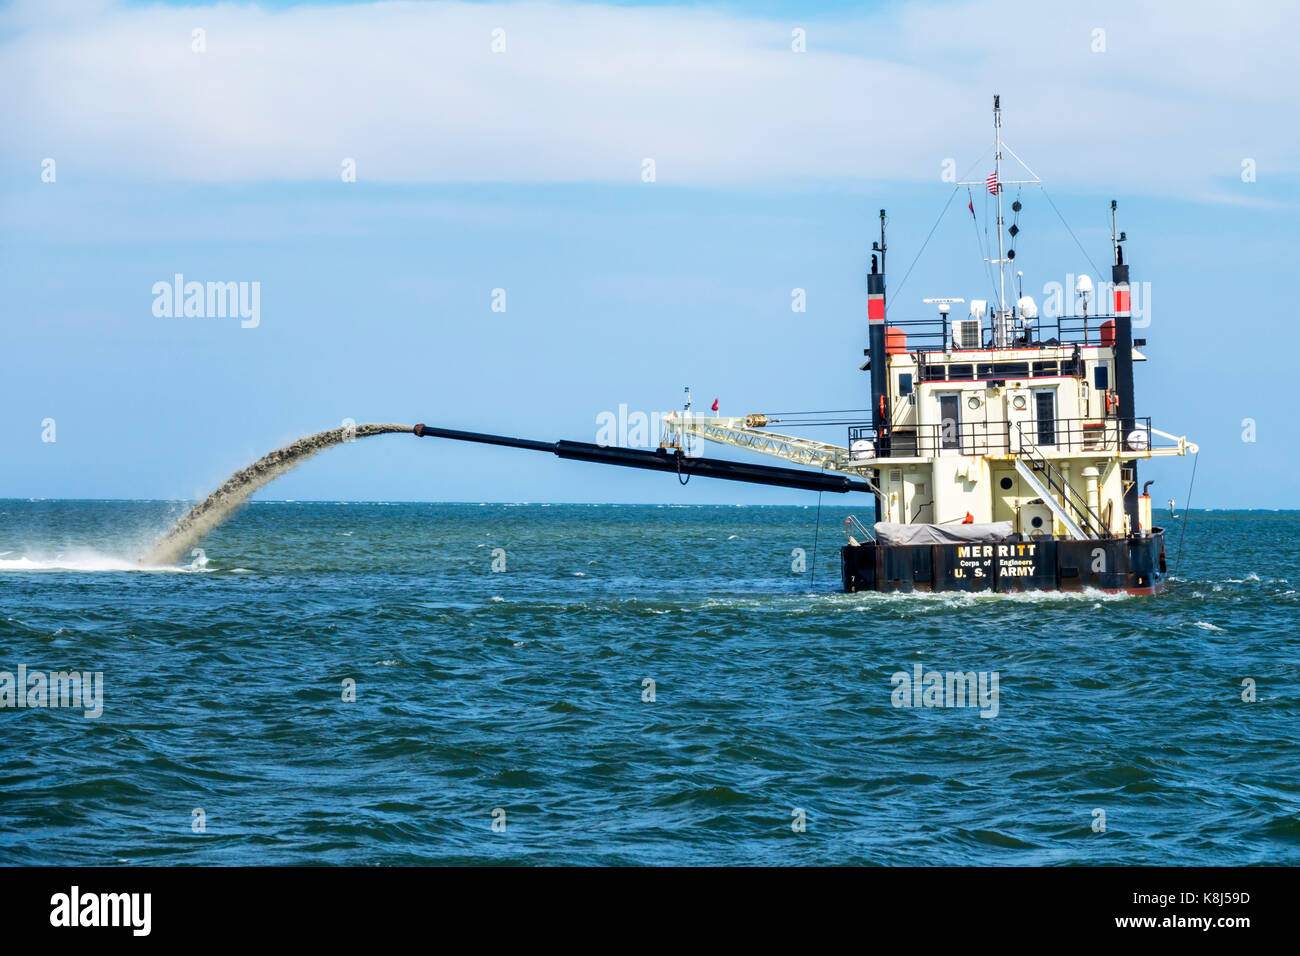 North Carolina,NC,Outer Banks,Ocracoke Island,Pamlico Sound,dredging,sidecast dredge boat,Army Corps of Engineers,vessel,Merritt,NC170518130 Stock Photo